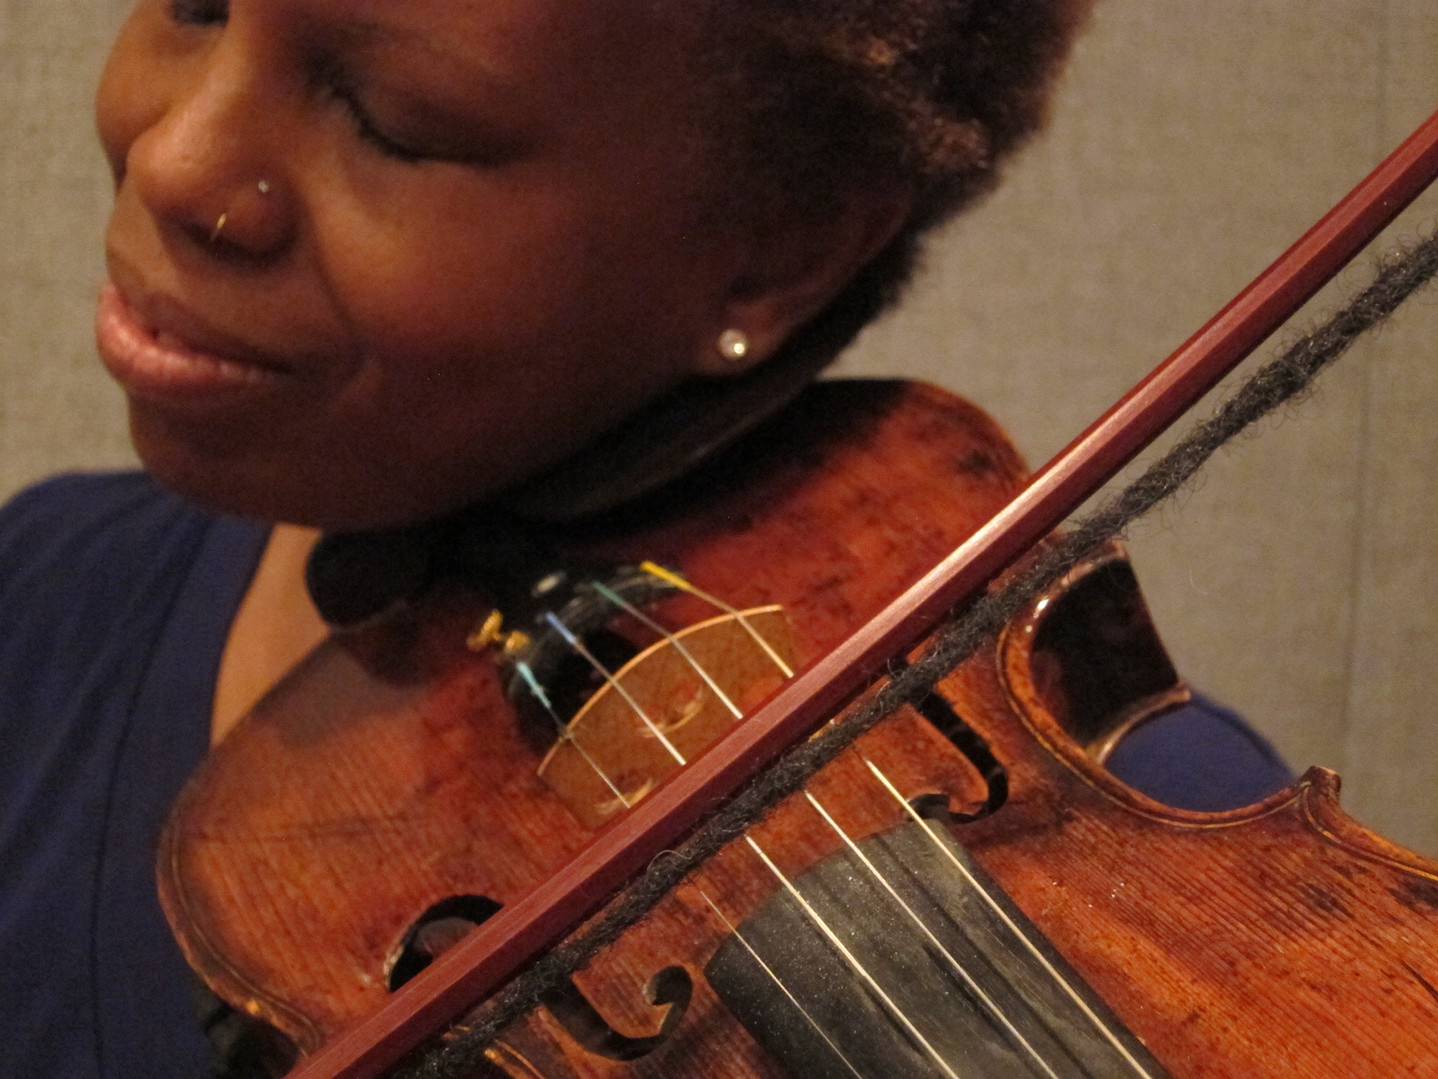 A color photograph of a dark-skinned woman holding a violin and playing its strings with the bow strung from a dreadlock.